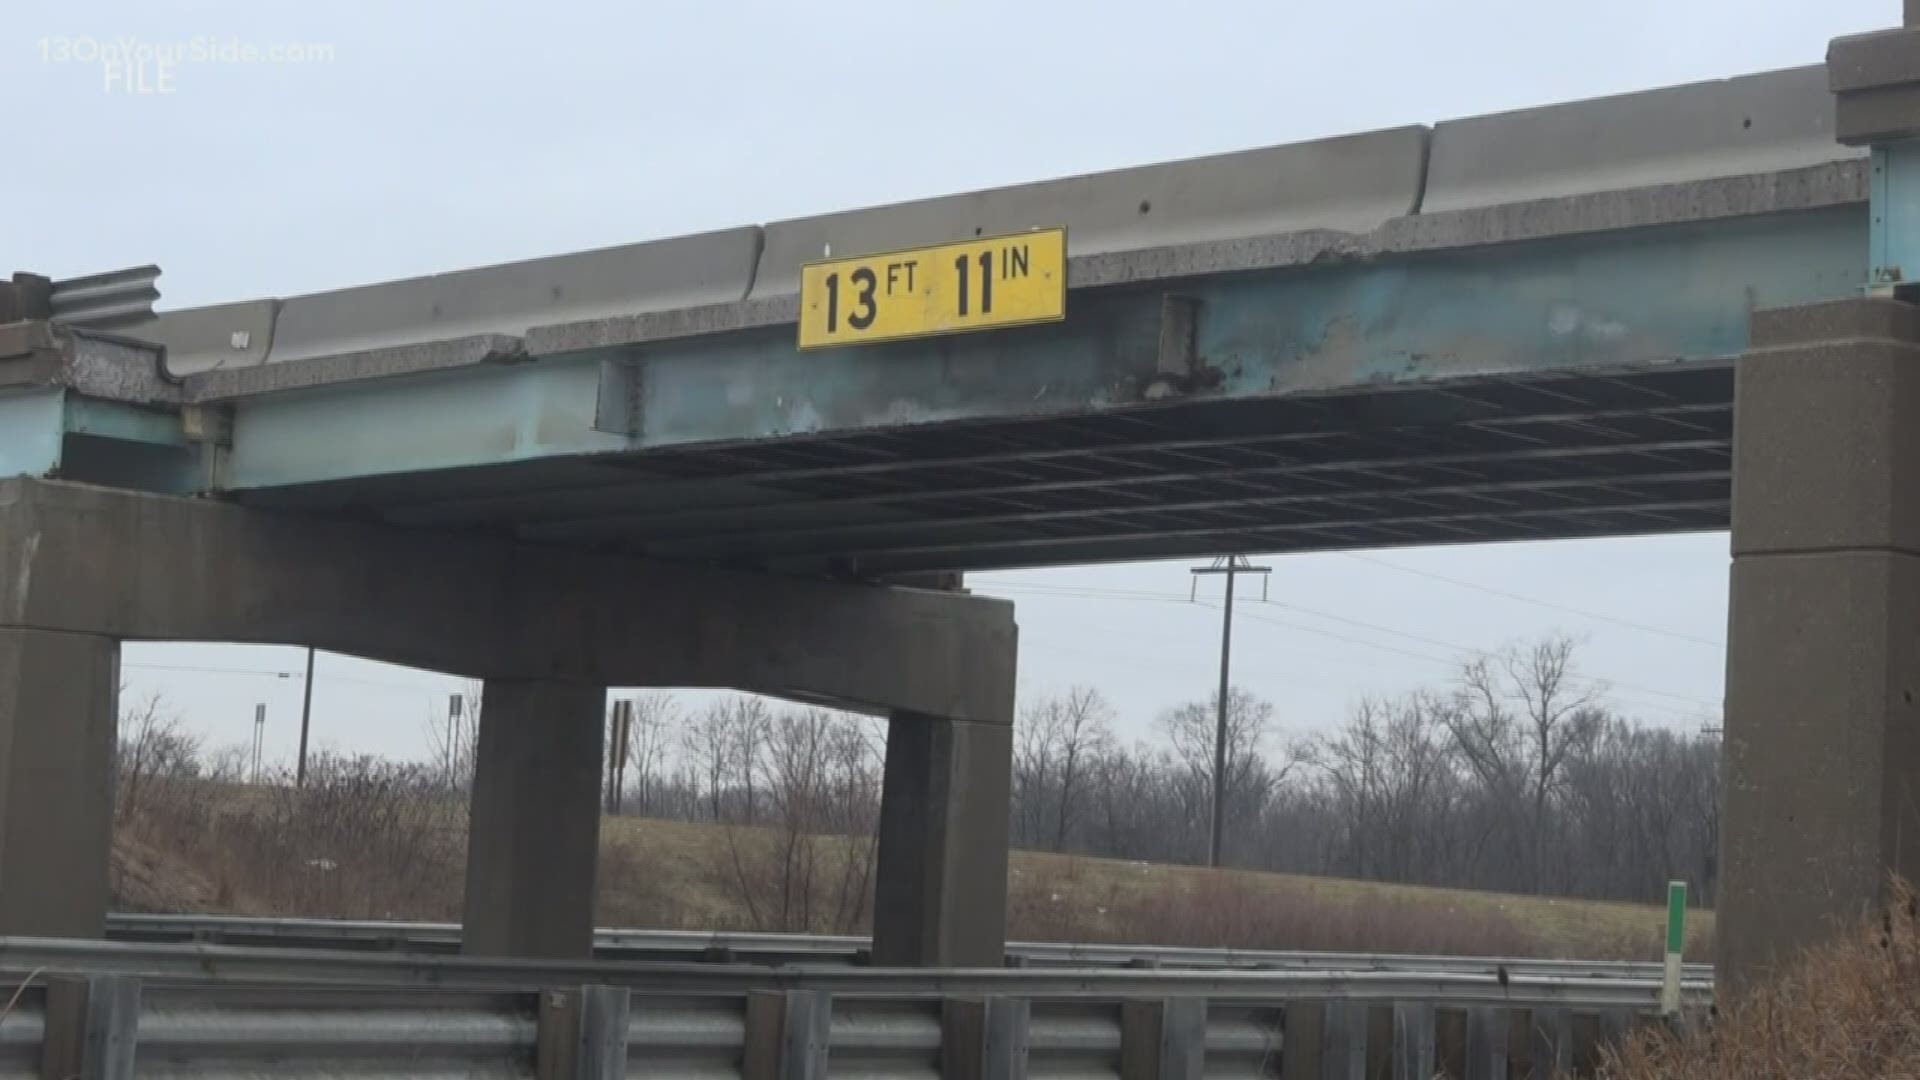 The 100th Street Bridge has been battered after being repeatedly struck by trucks.